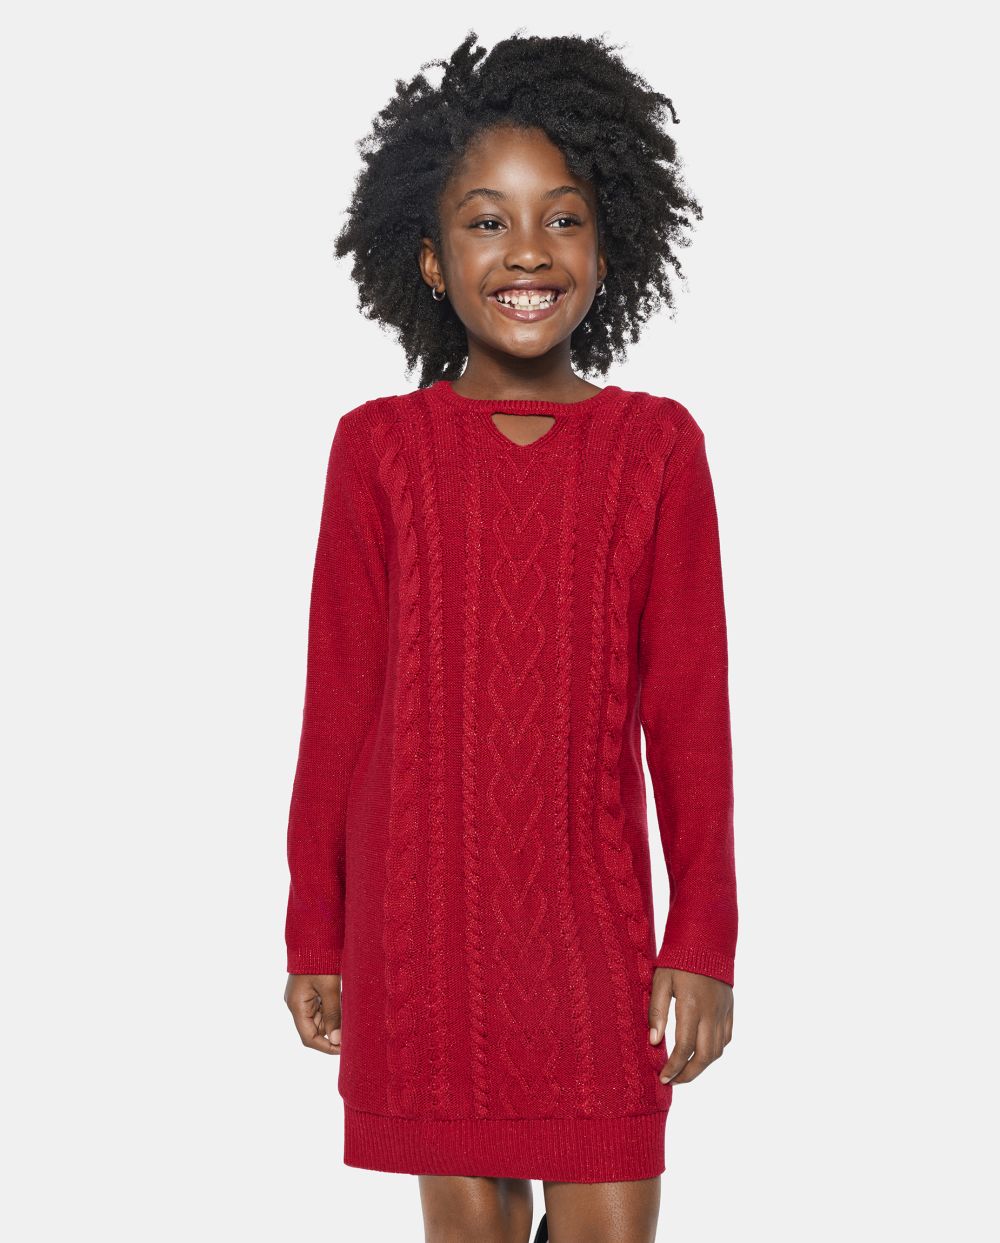 Girls Above the Knee Cutout Crew Neck Long Sleeves Sweater Dress